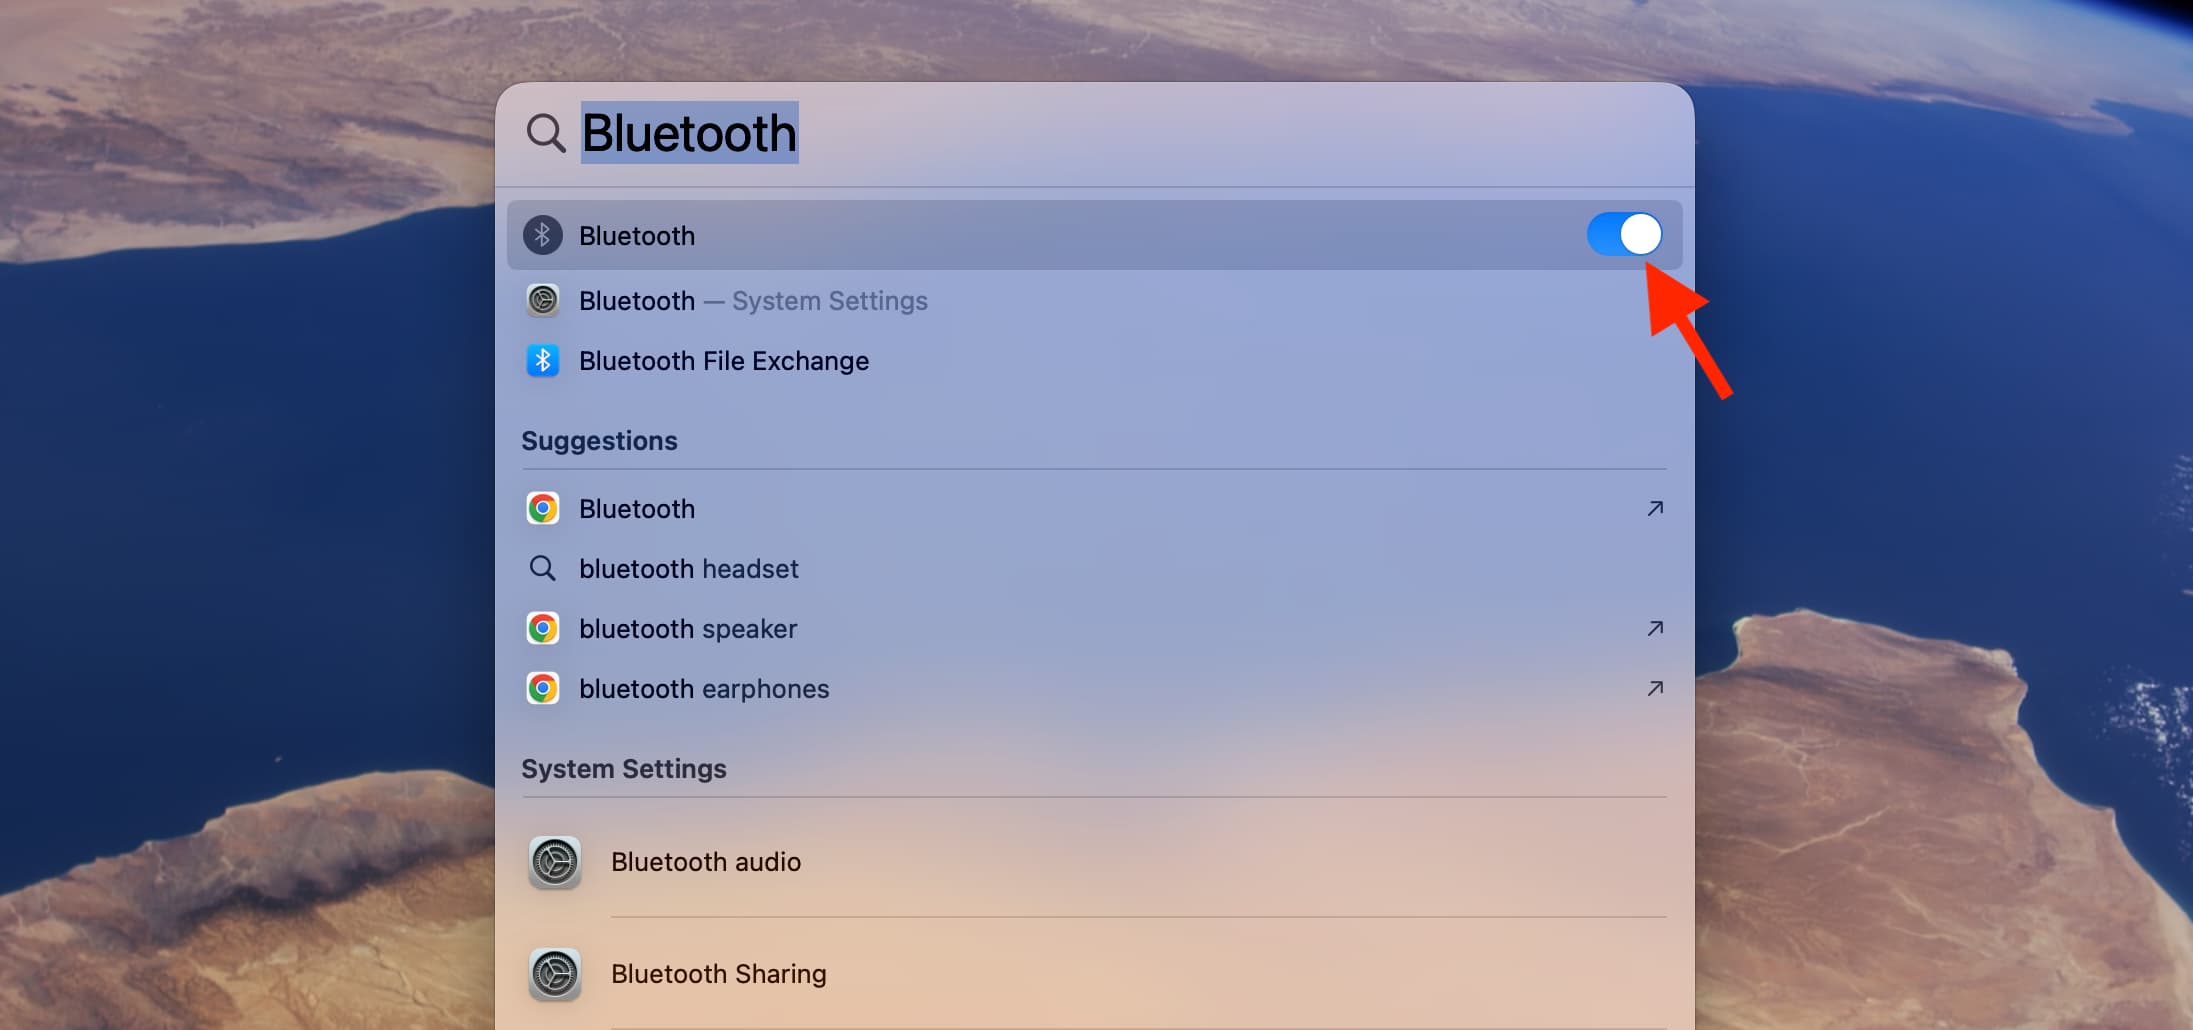 System Setting quick toggle in Spotlight on Mac